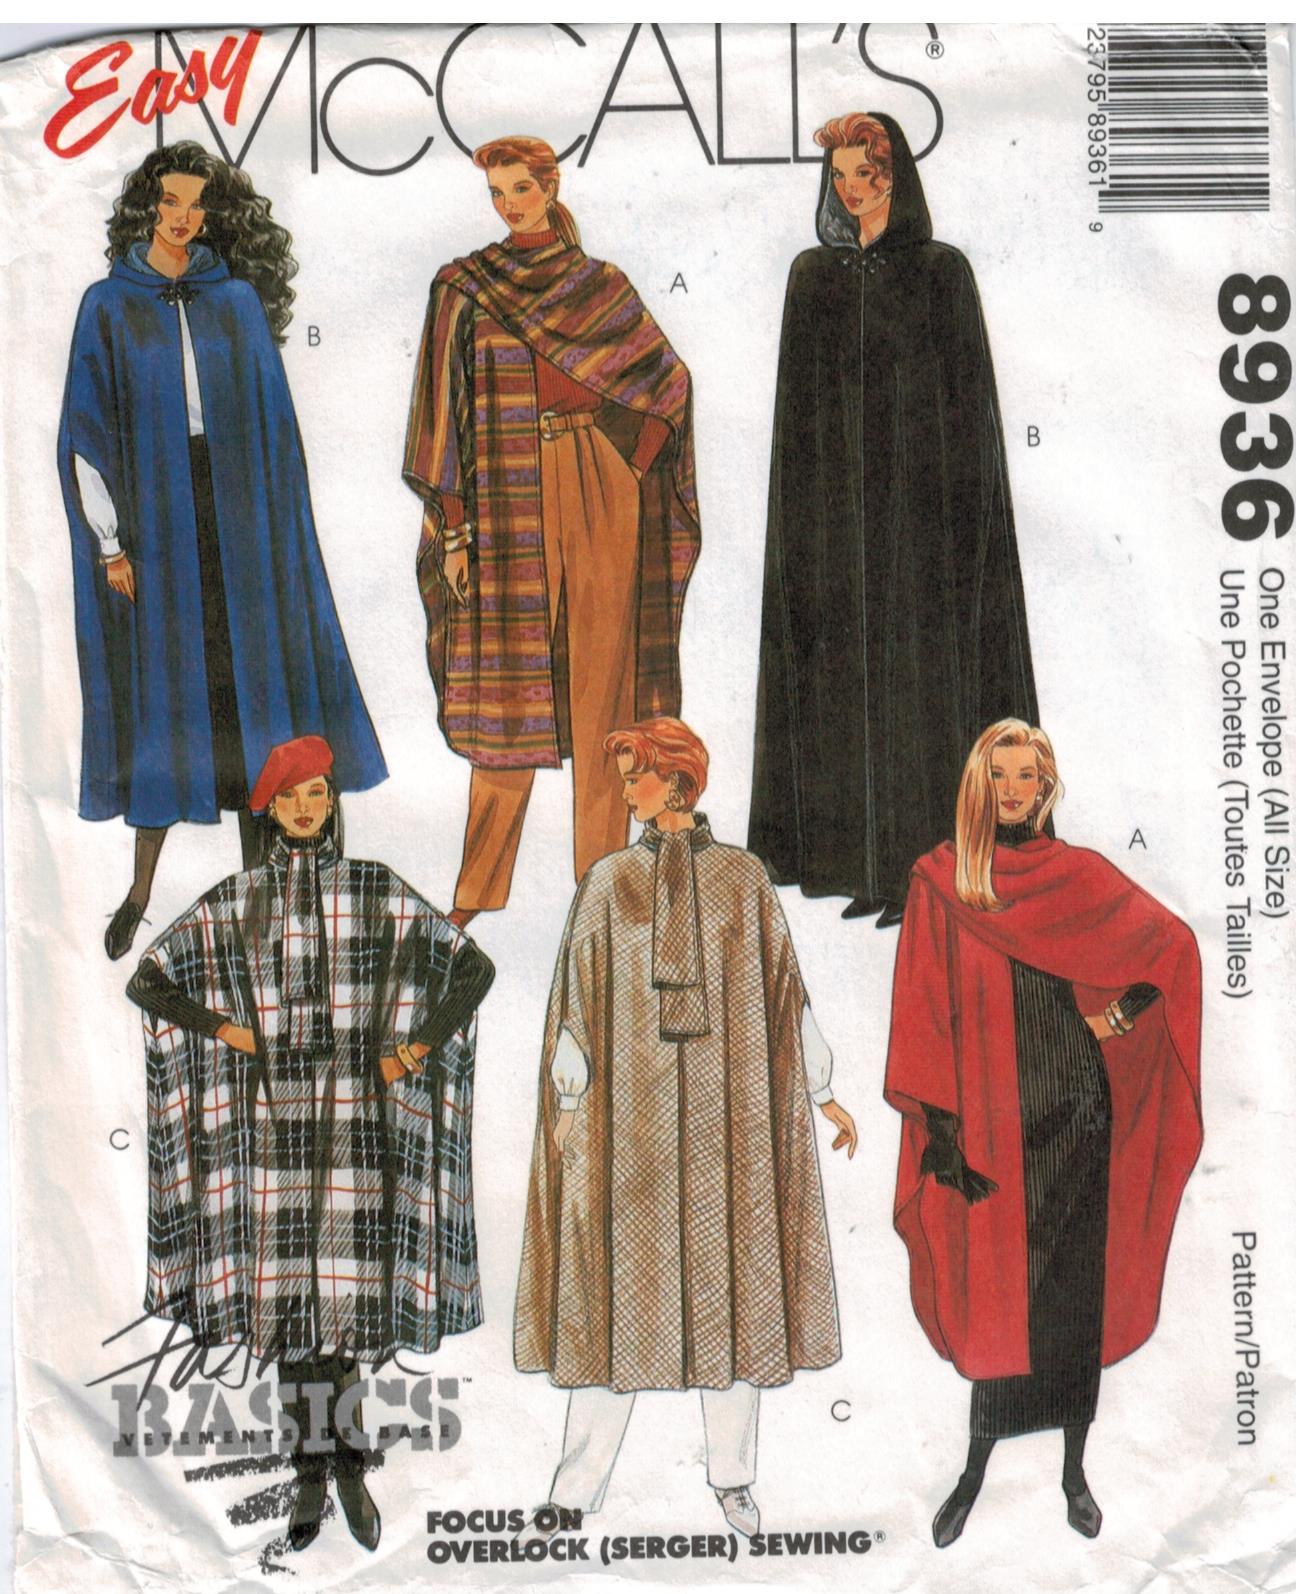 McCalls Pattern 8936 Easy to Sew Fashion Basics collection of capes and  wraps Misses sizes 6 through 20